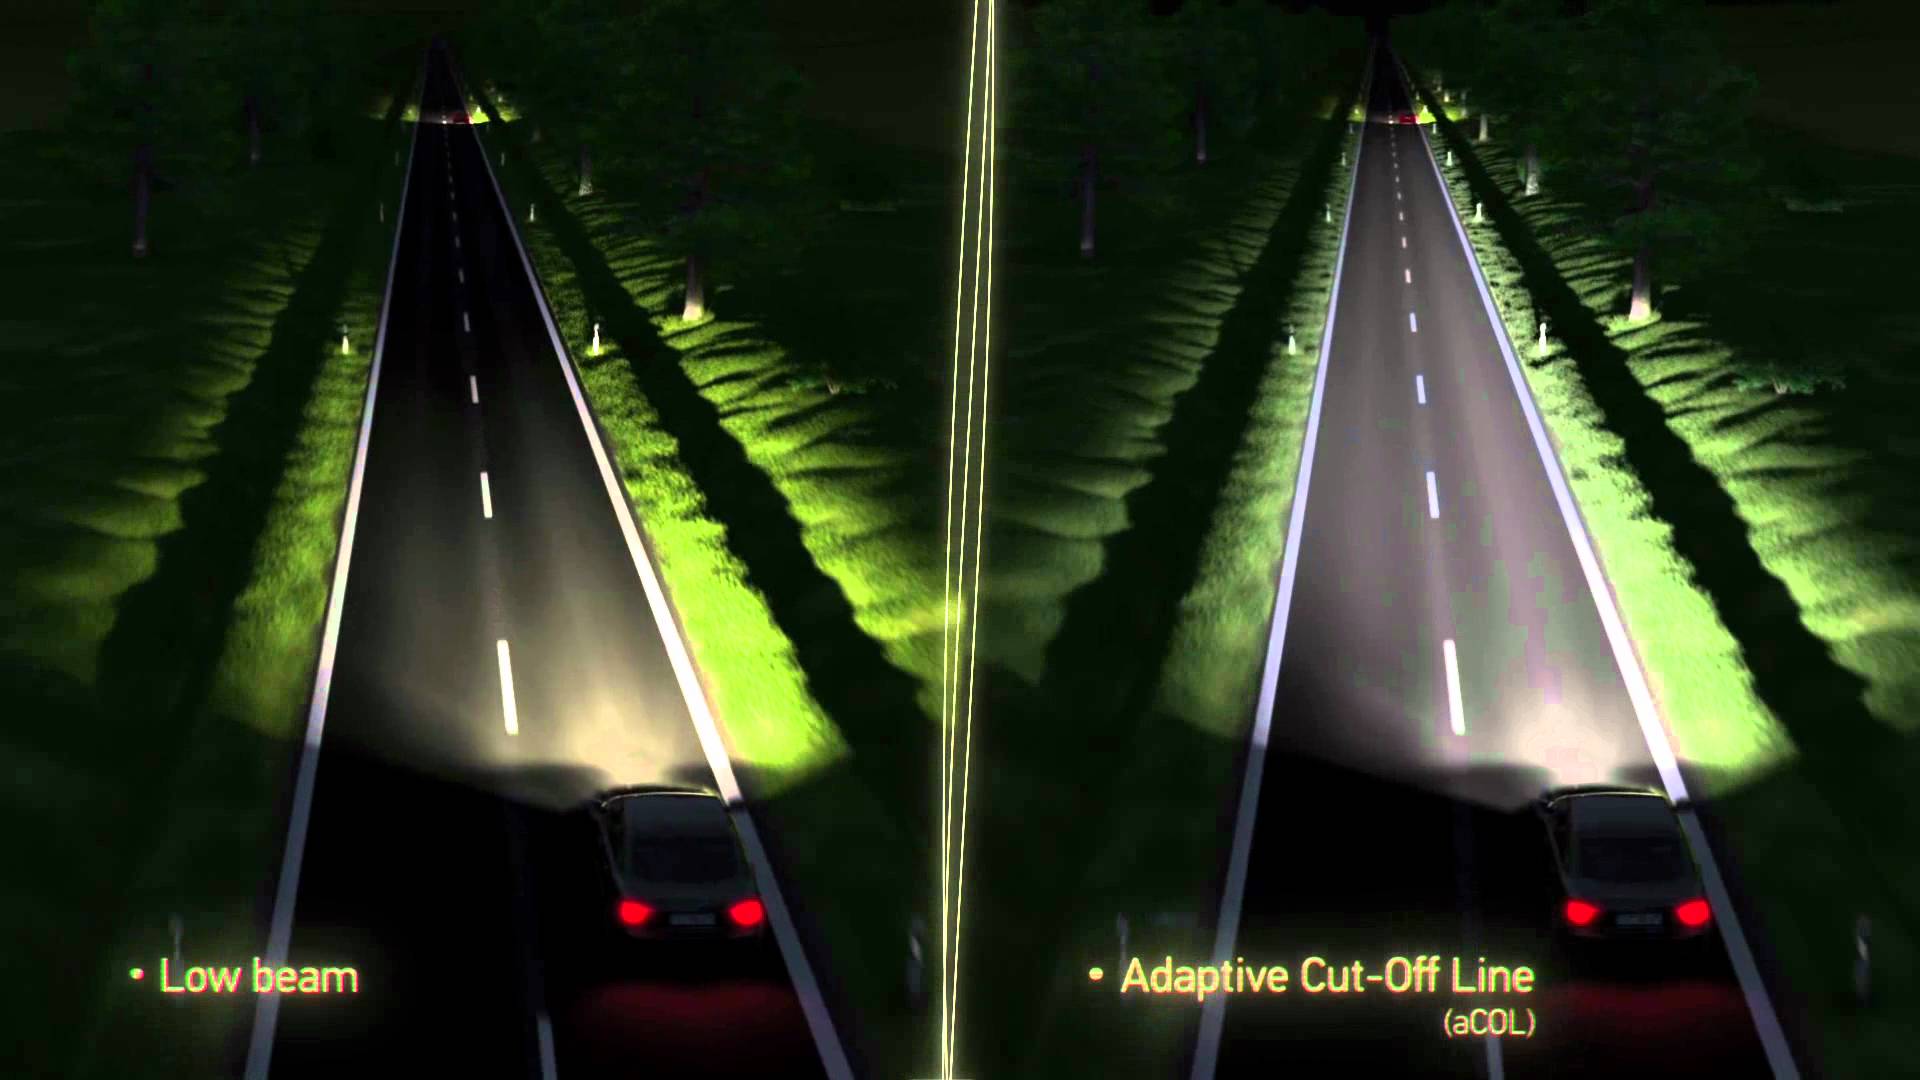 HELLA Adaptive cut-off line - Optimal reach of the low beam - YouTube